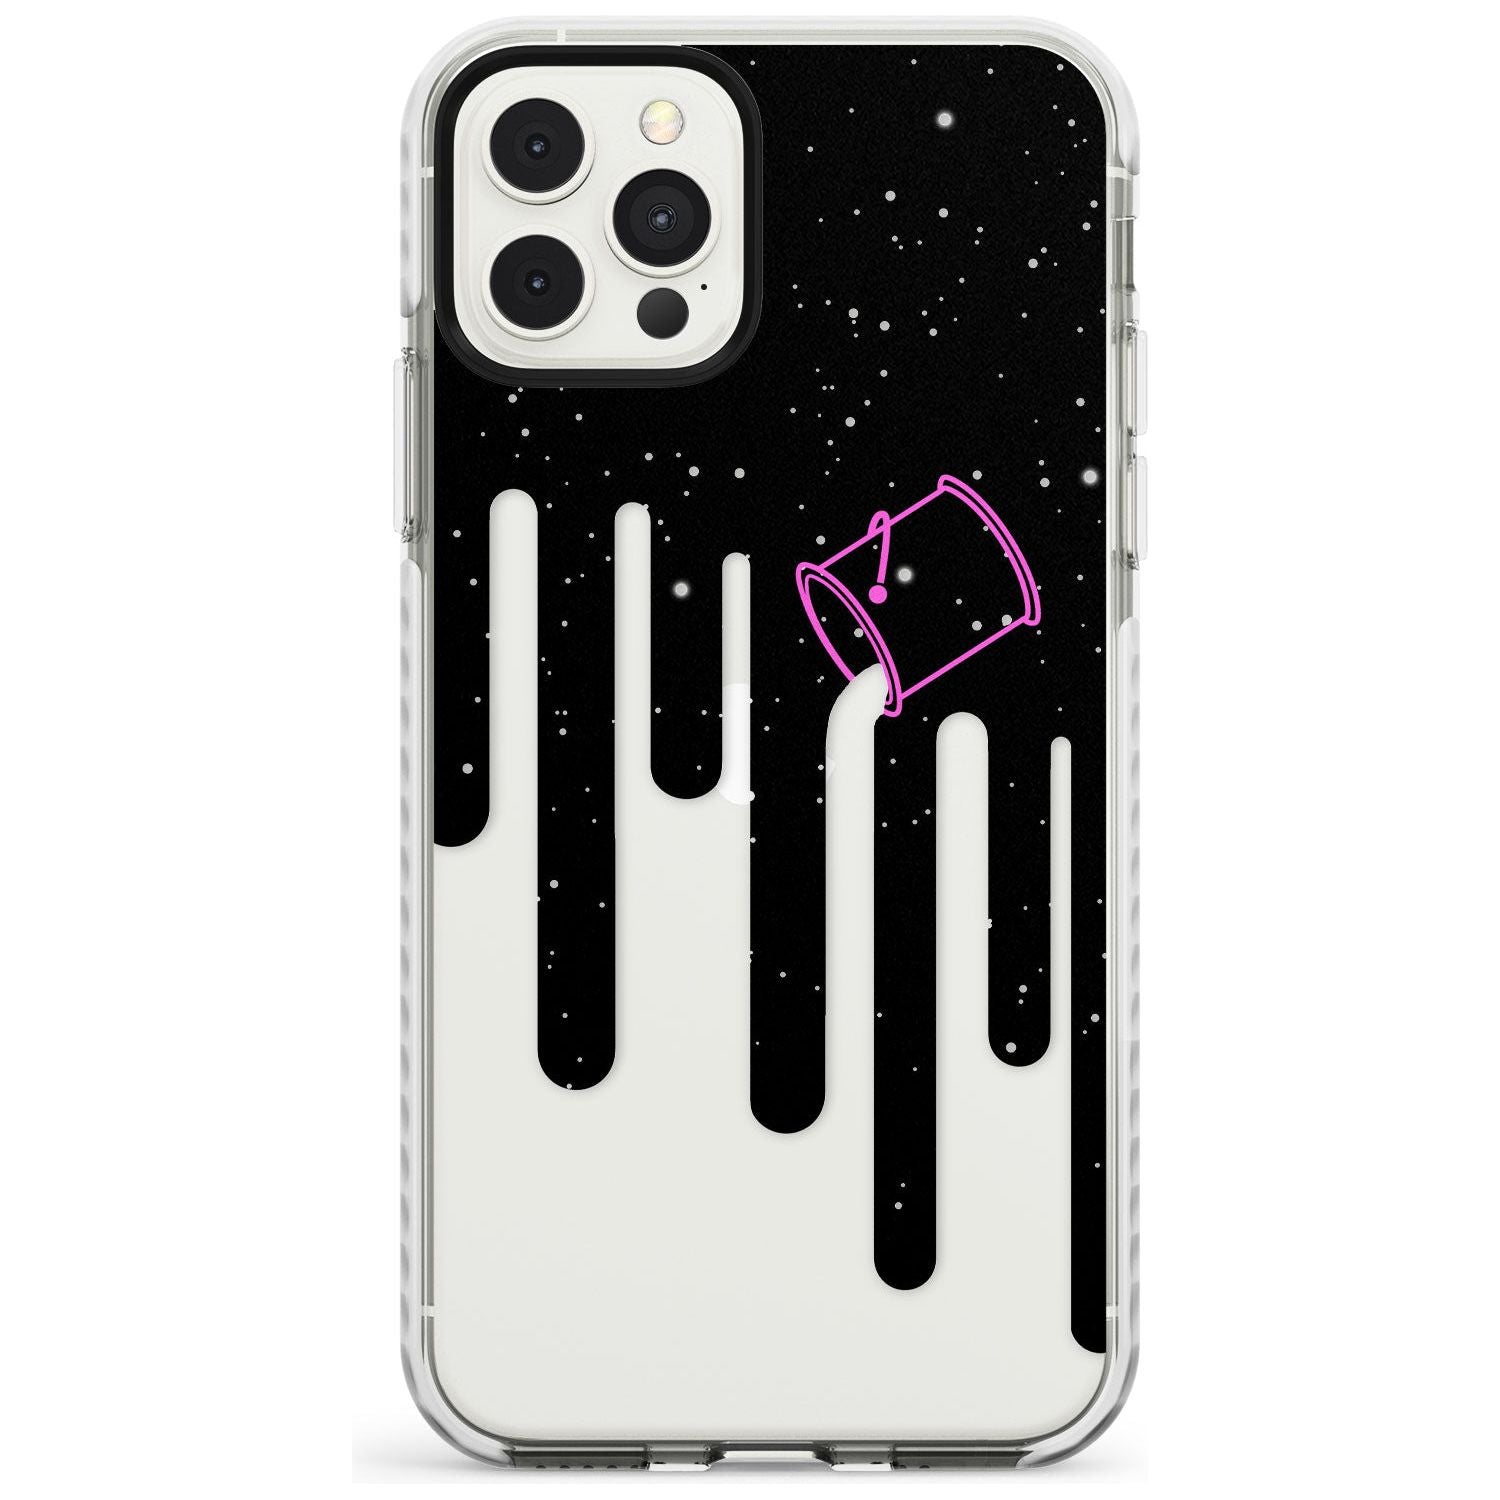 Space Bucket Slim TPU Phone Case for iPhone 11 Pro Max